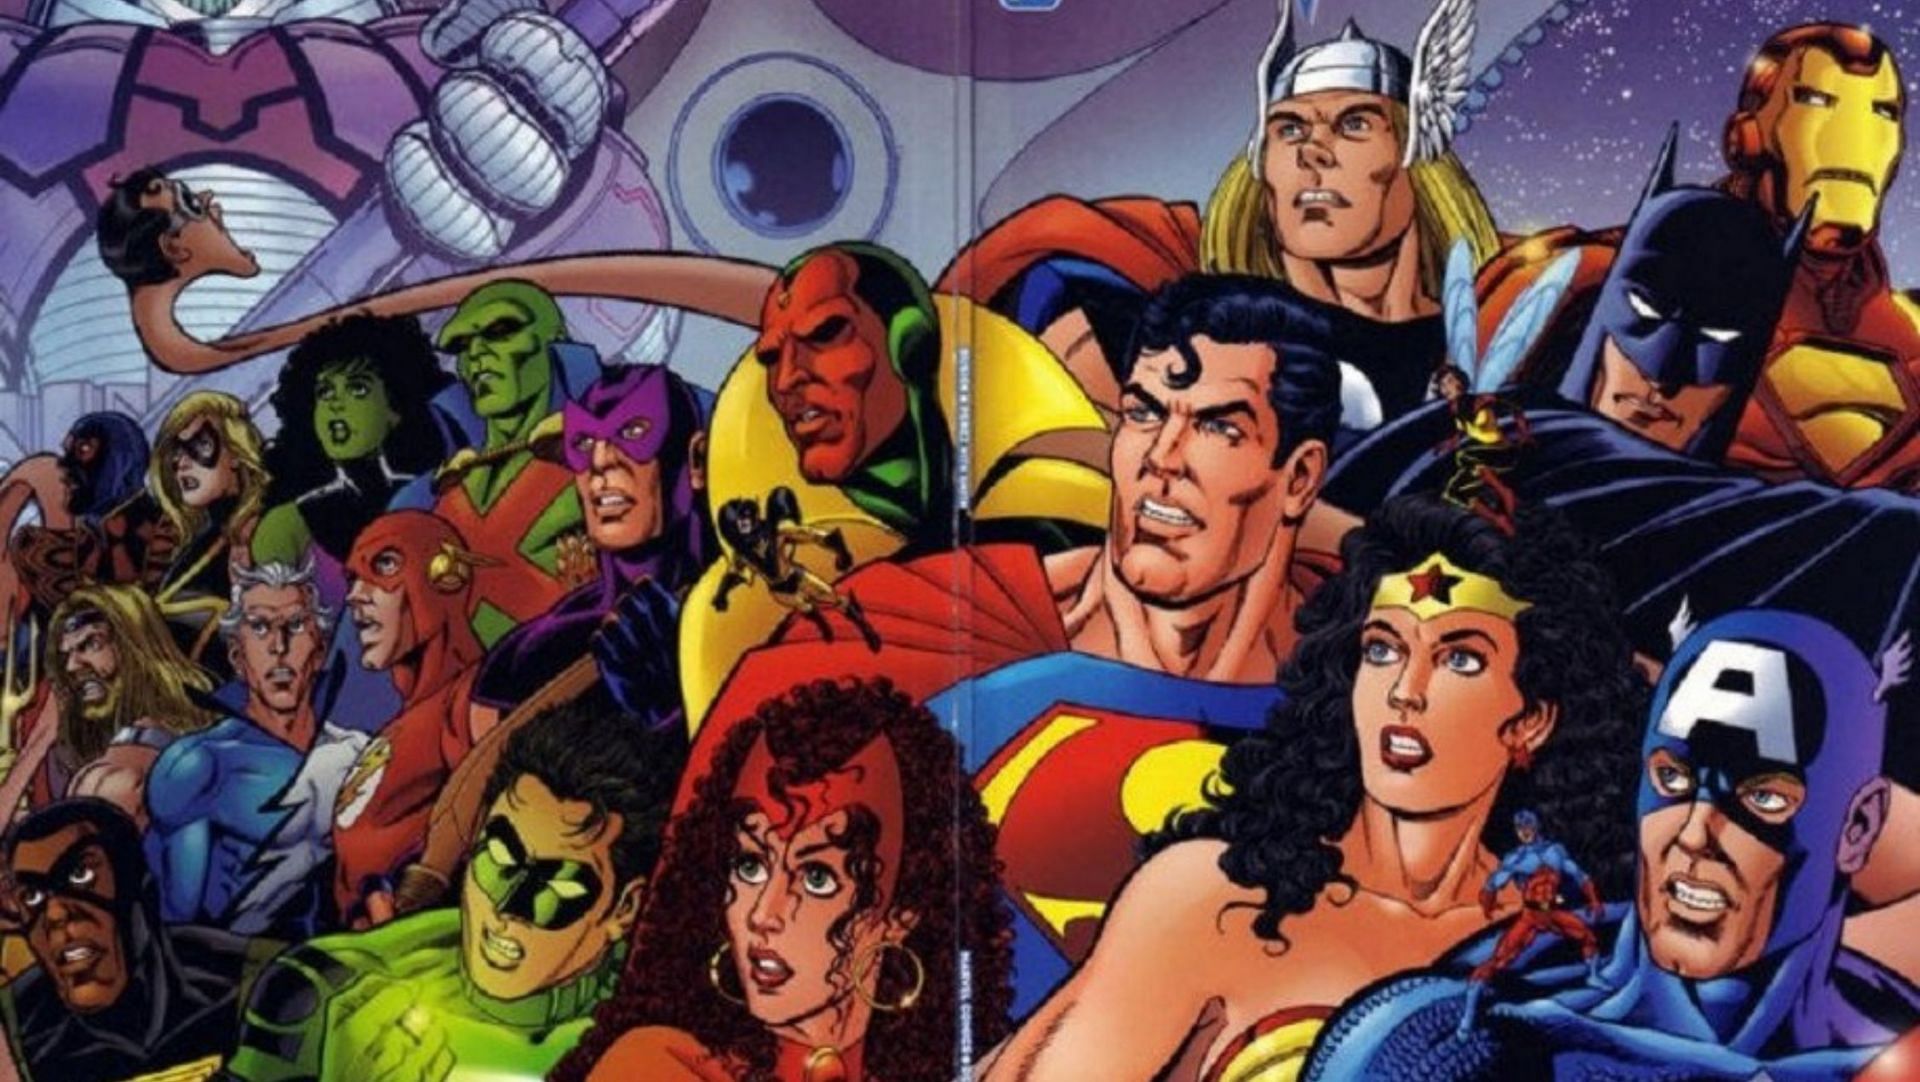 Avengers/JLA: two teams, one epic crossover adventure (Image via DC and Marvel Comics)